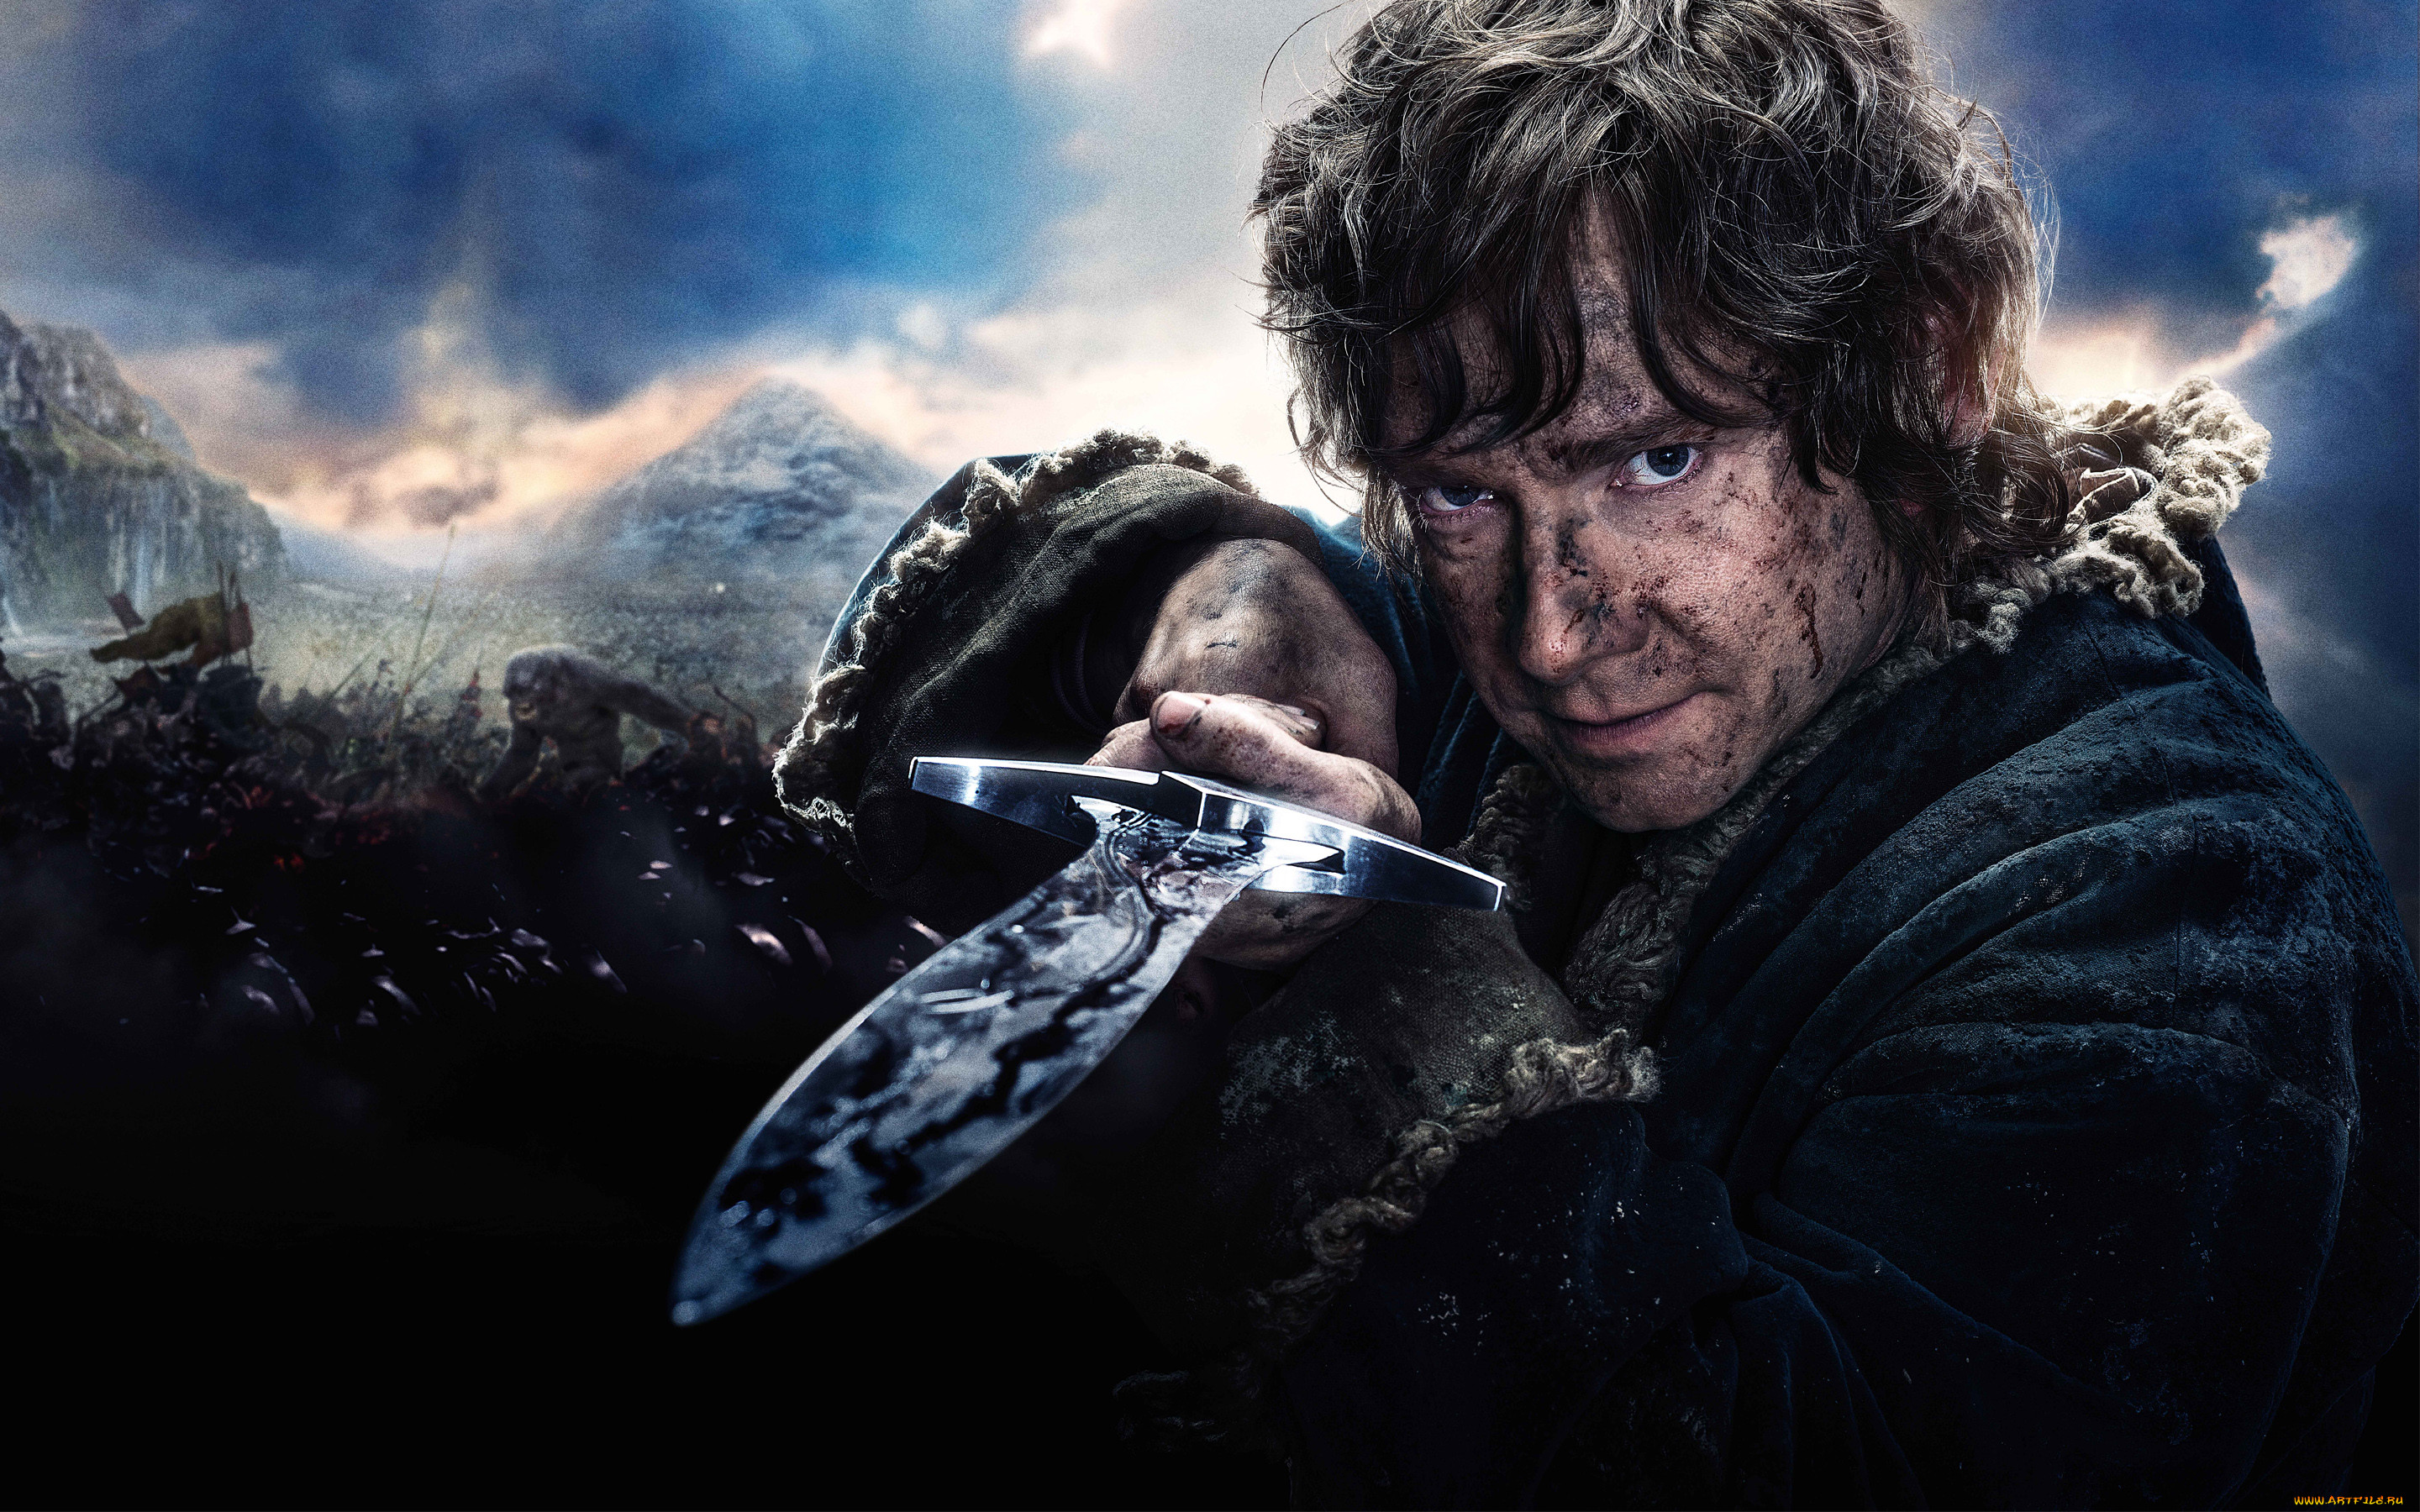  , the hobbit,  the battle of the five armies, the, battle, of, five, armies, hobbit